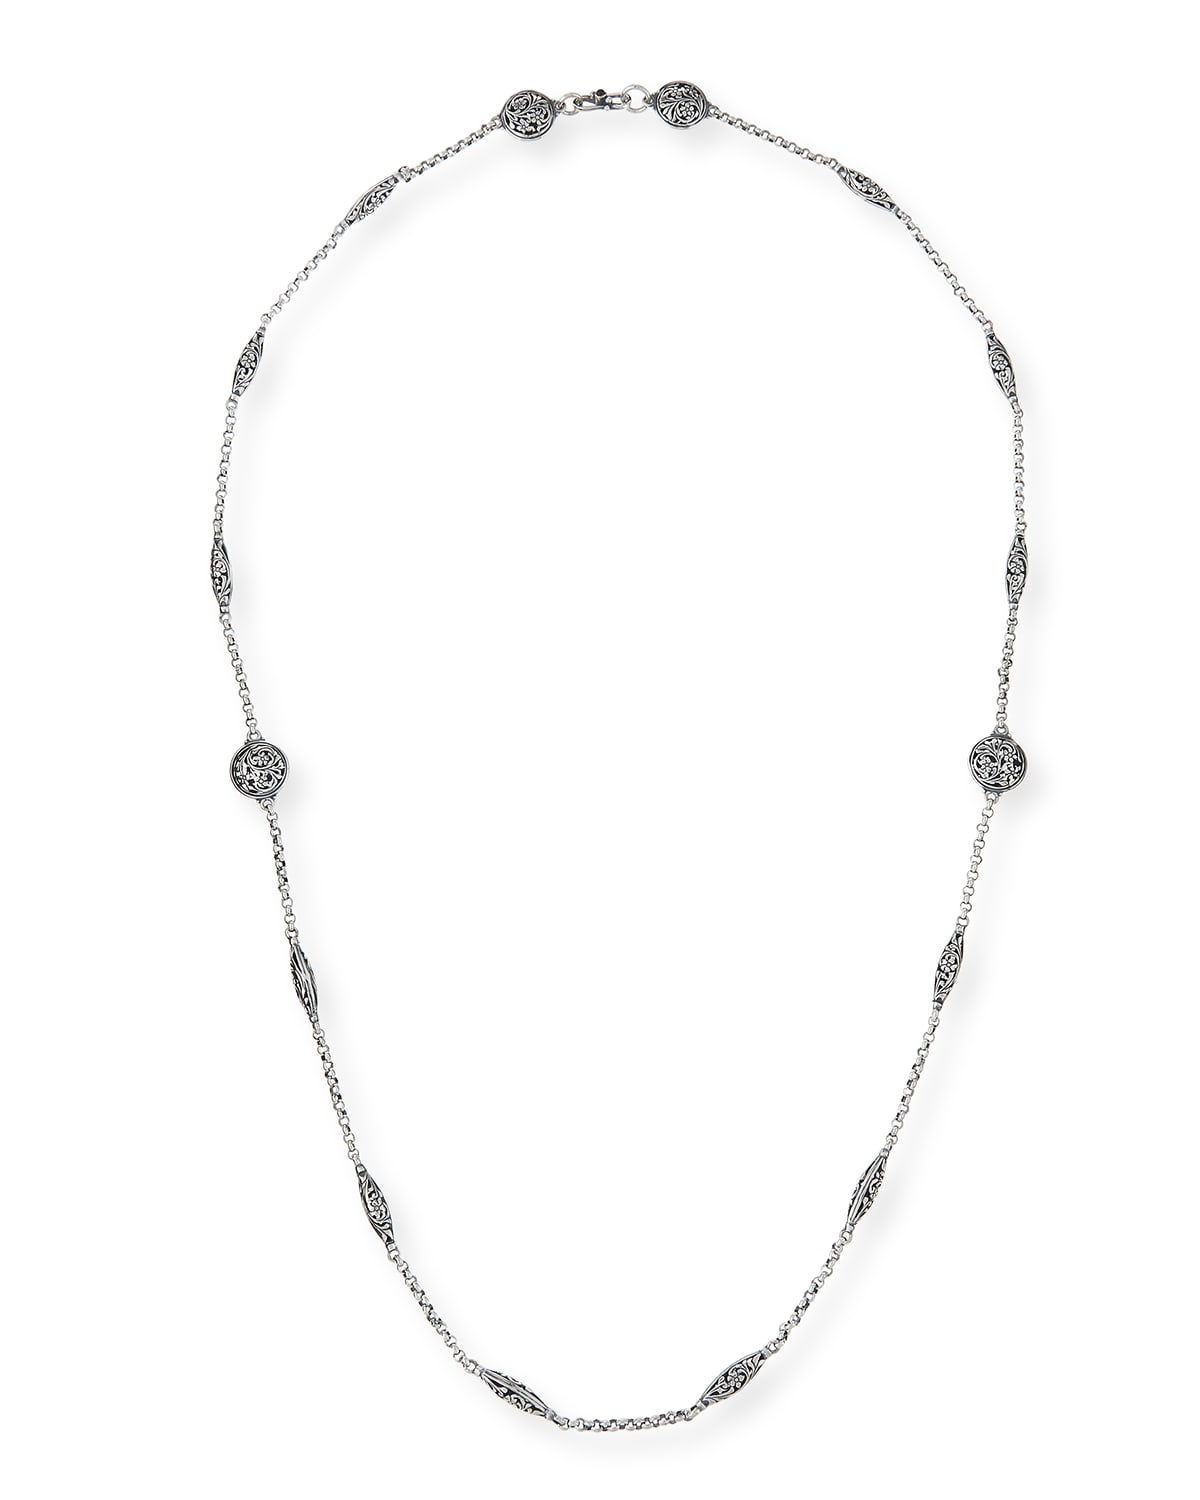 Sterling Etched Dot Chain Necklace, 36"L